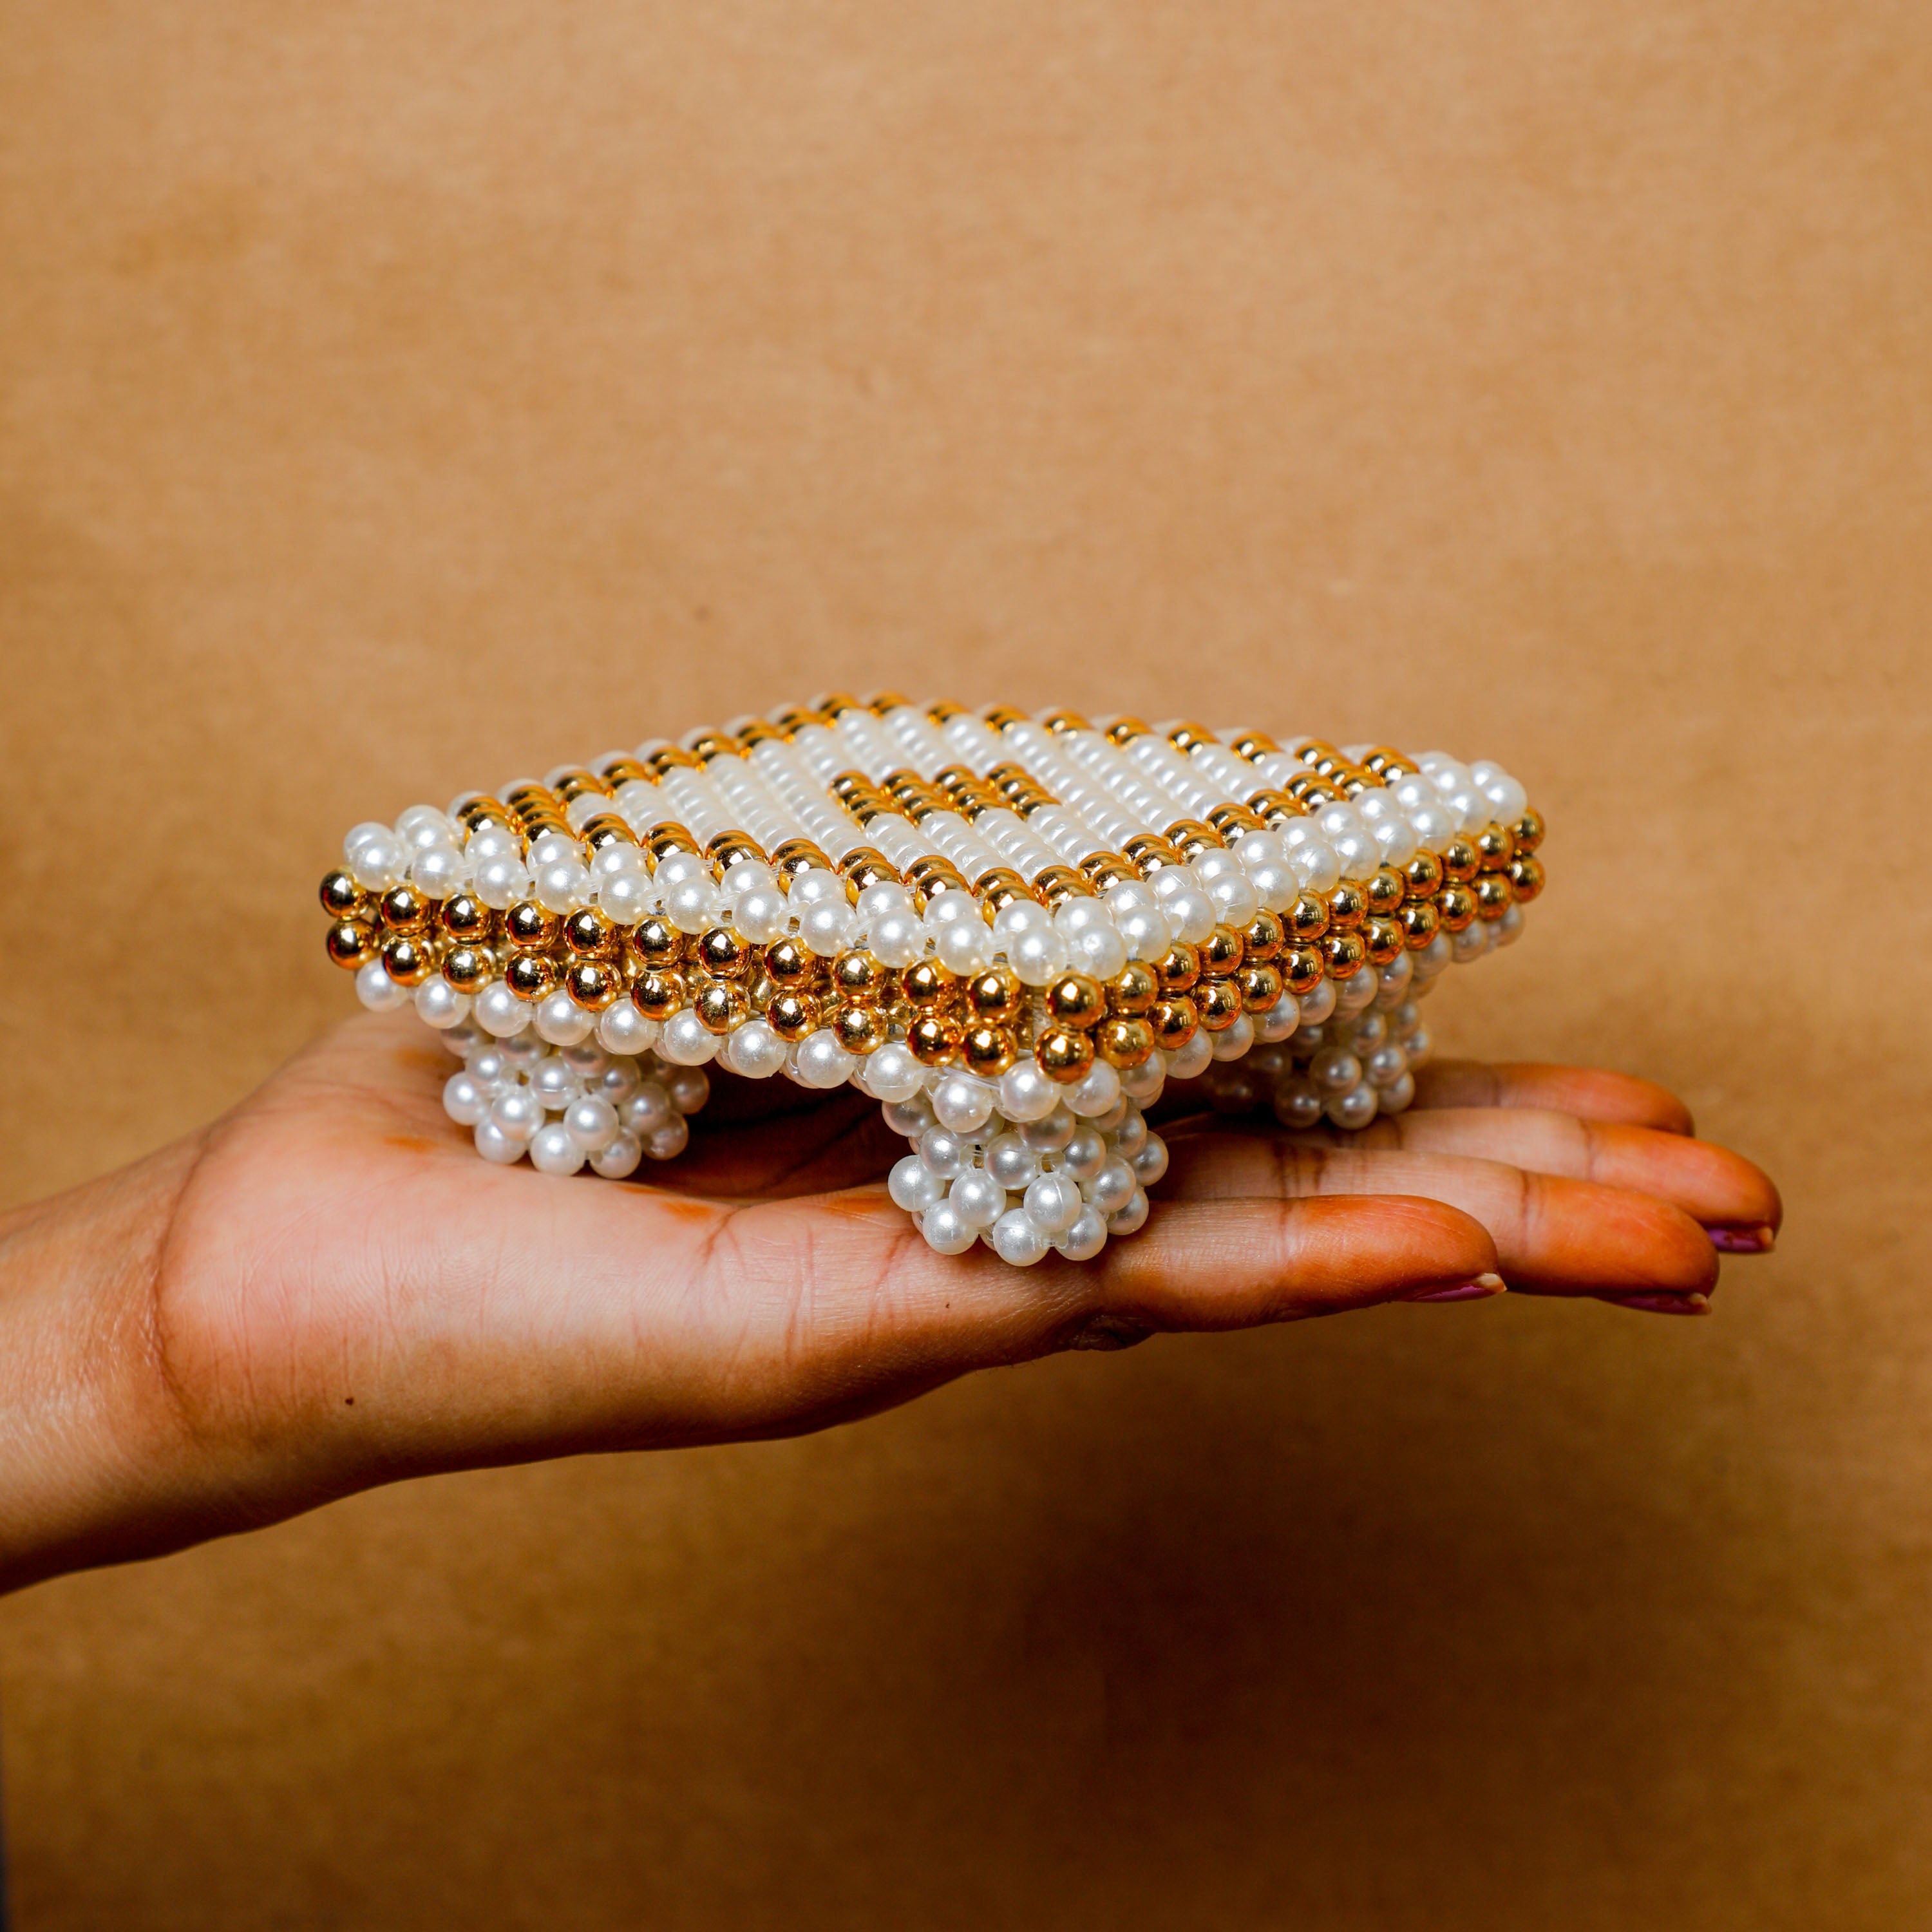 designed with great care, featuring a charming pattern of white and kesari pearls